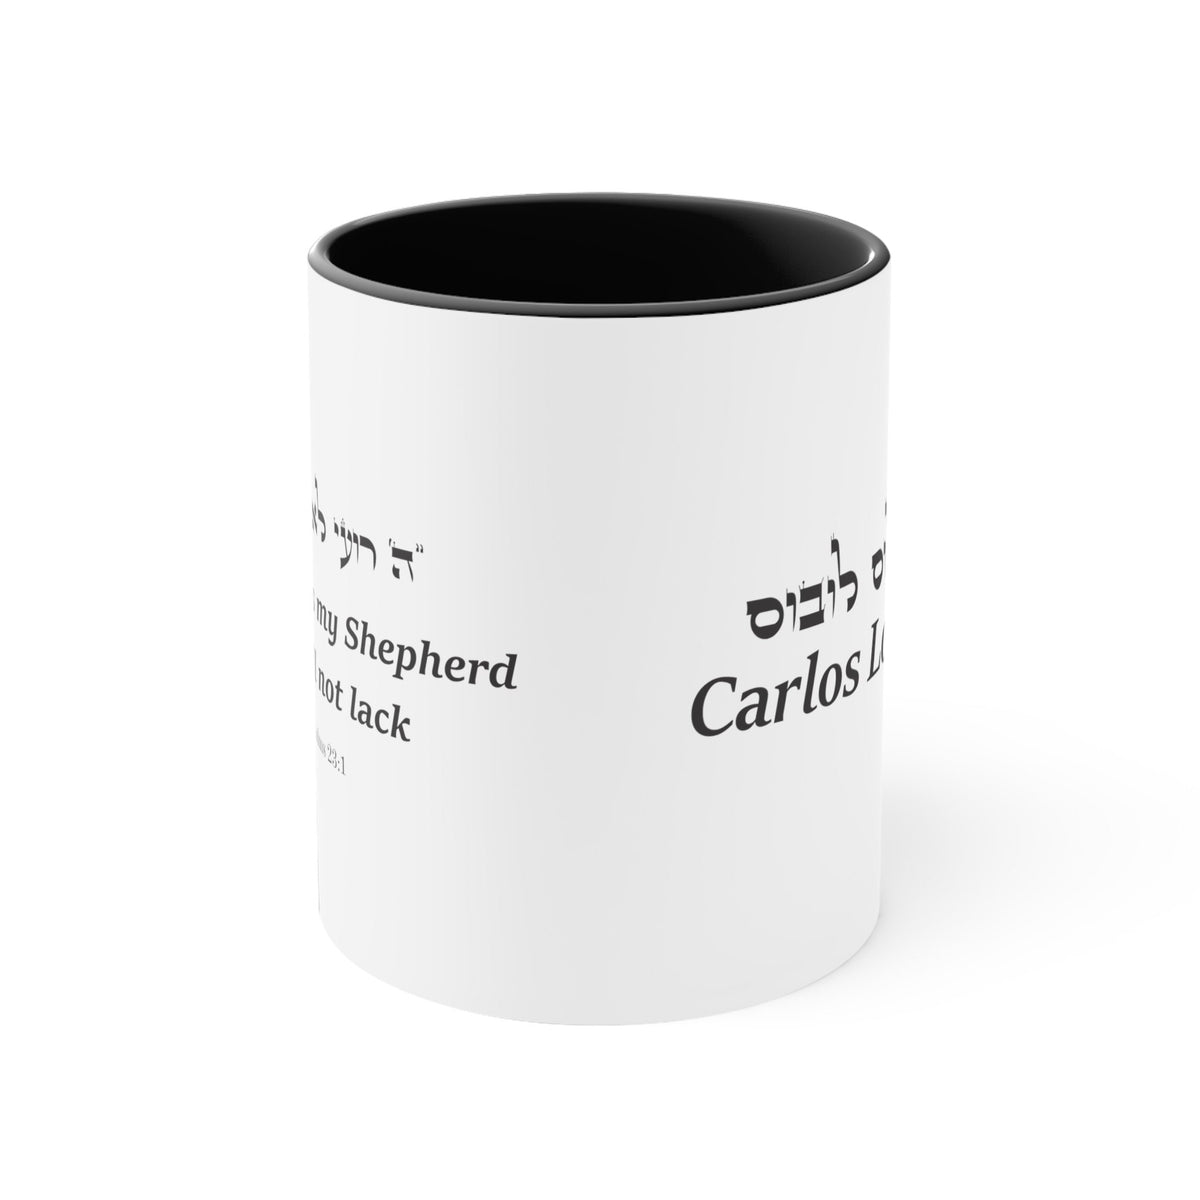 &quot;The lord is my shepherd i shall not lack&quot;. - Psalms 23:1, Inspiring Psalms Mug Biblical Verse, Judaica, Your Name and Verse.